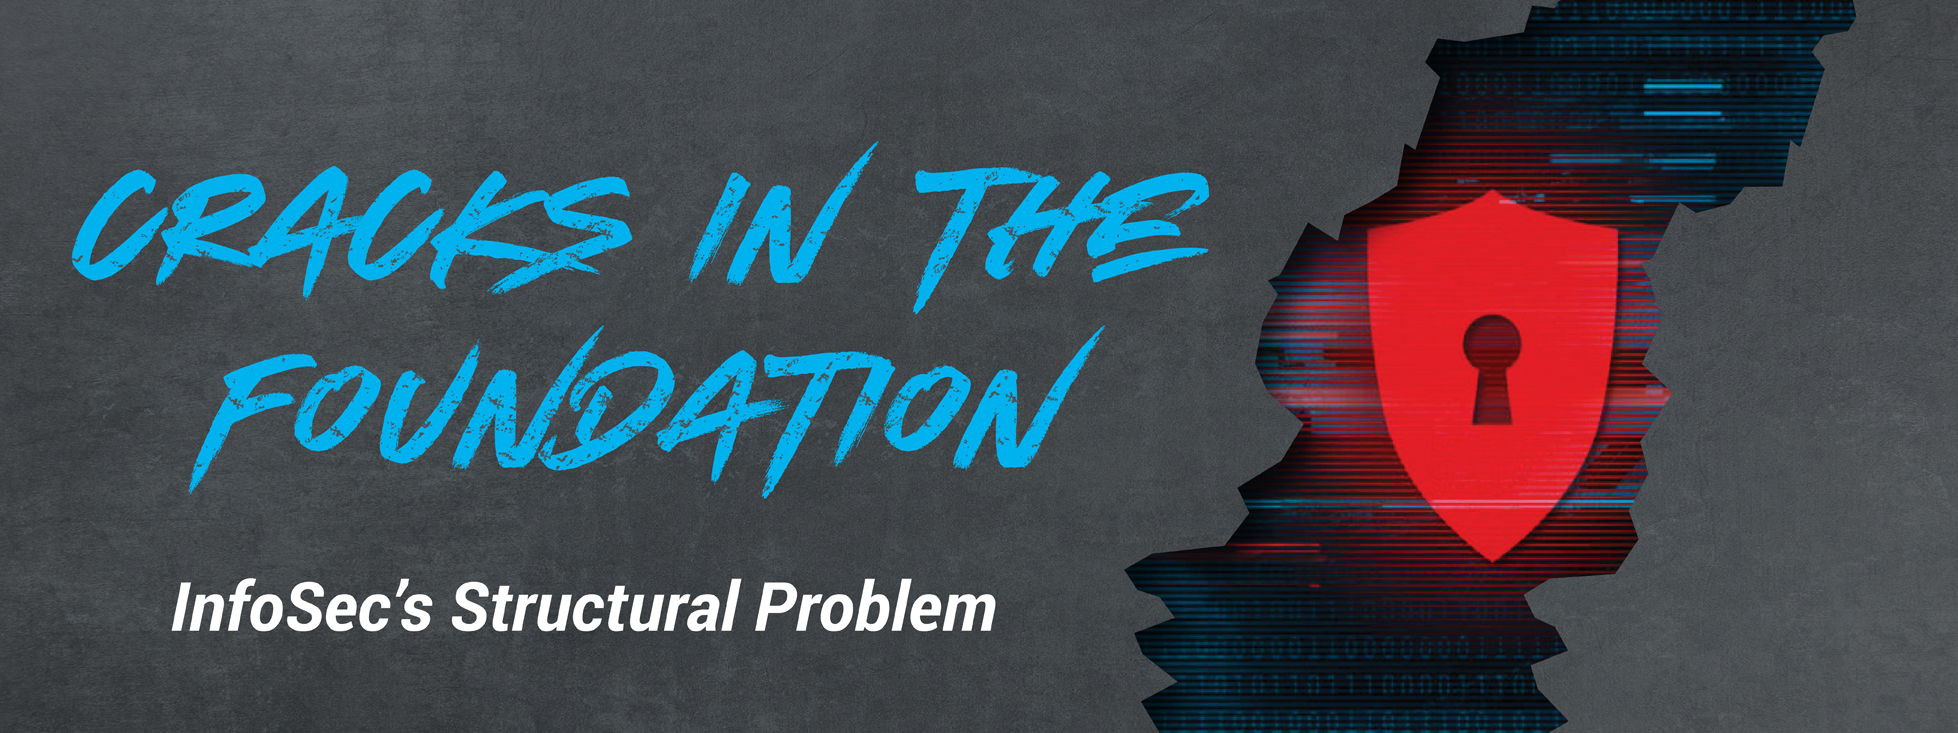 Cracks in the Foundation: InfoSec’s Structural Problem 